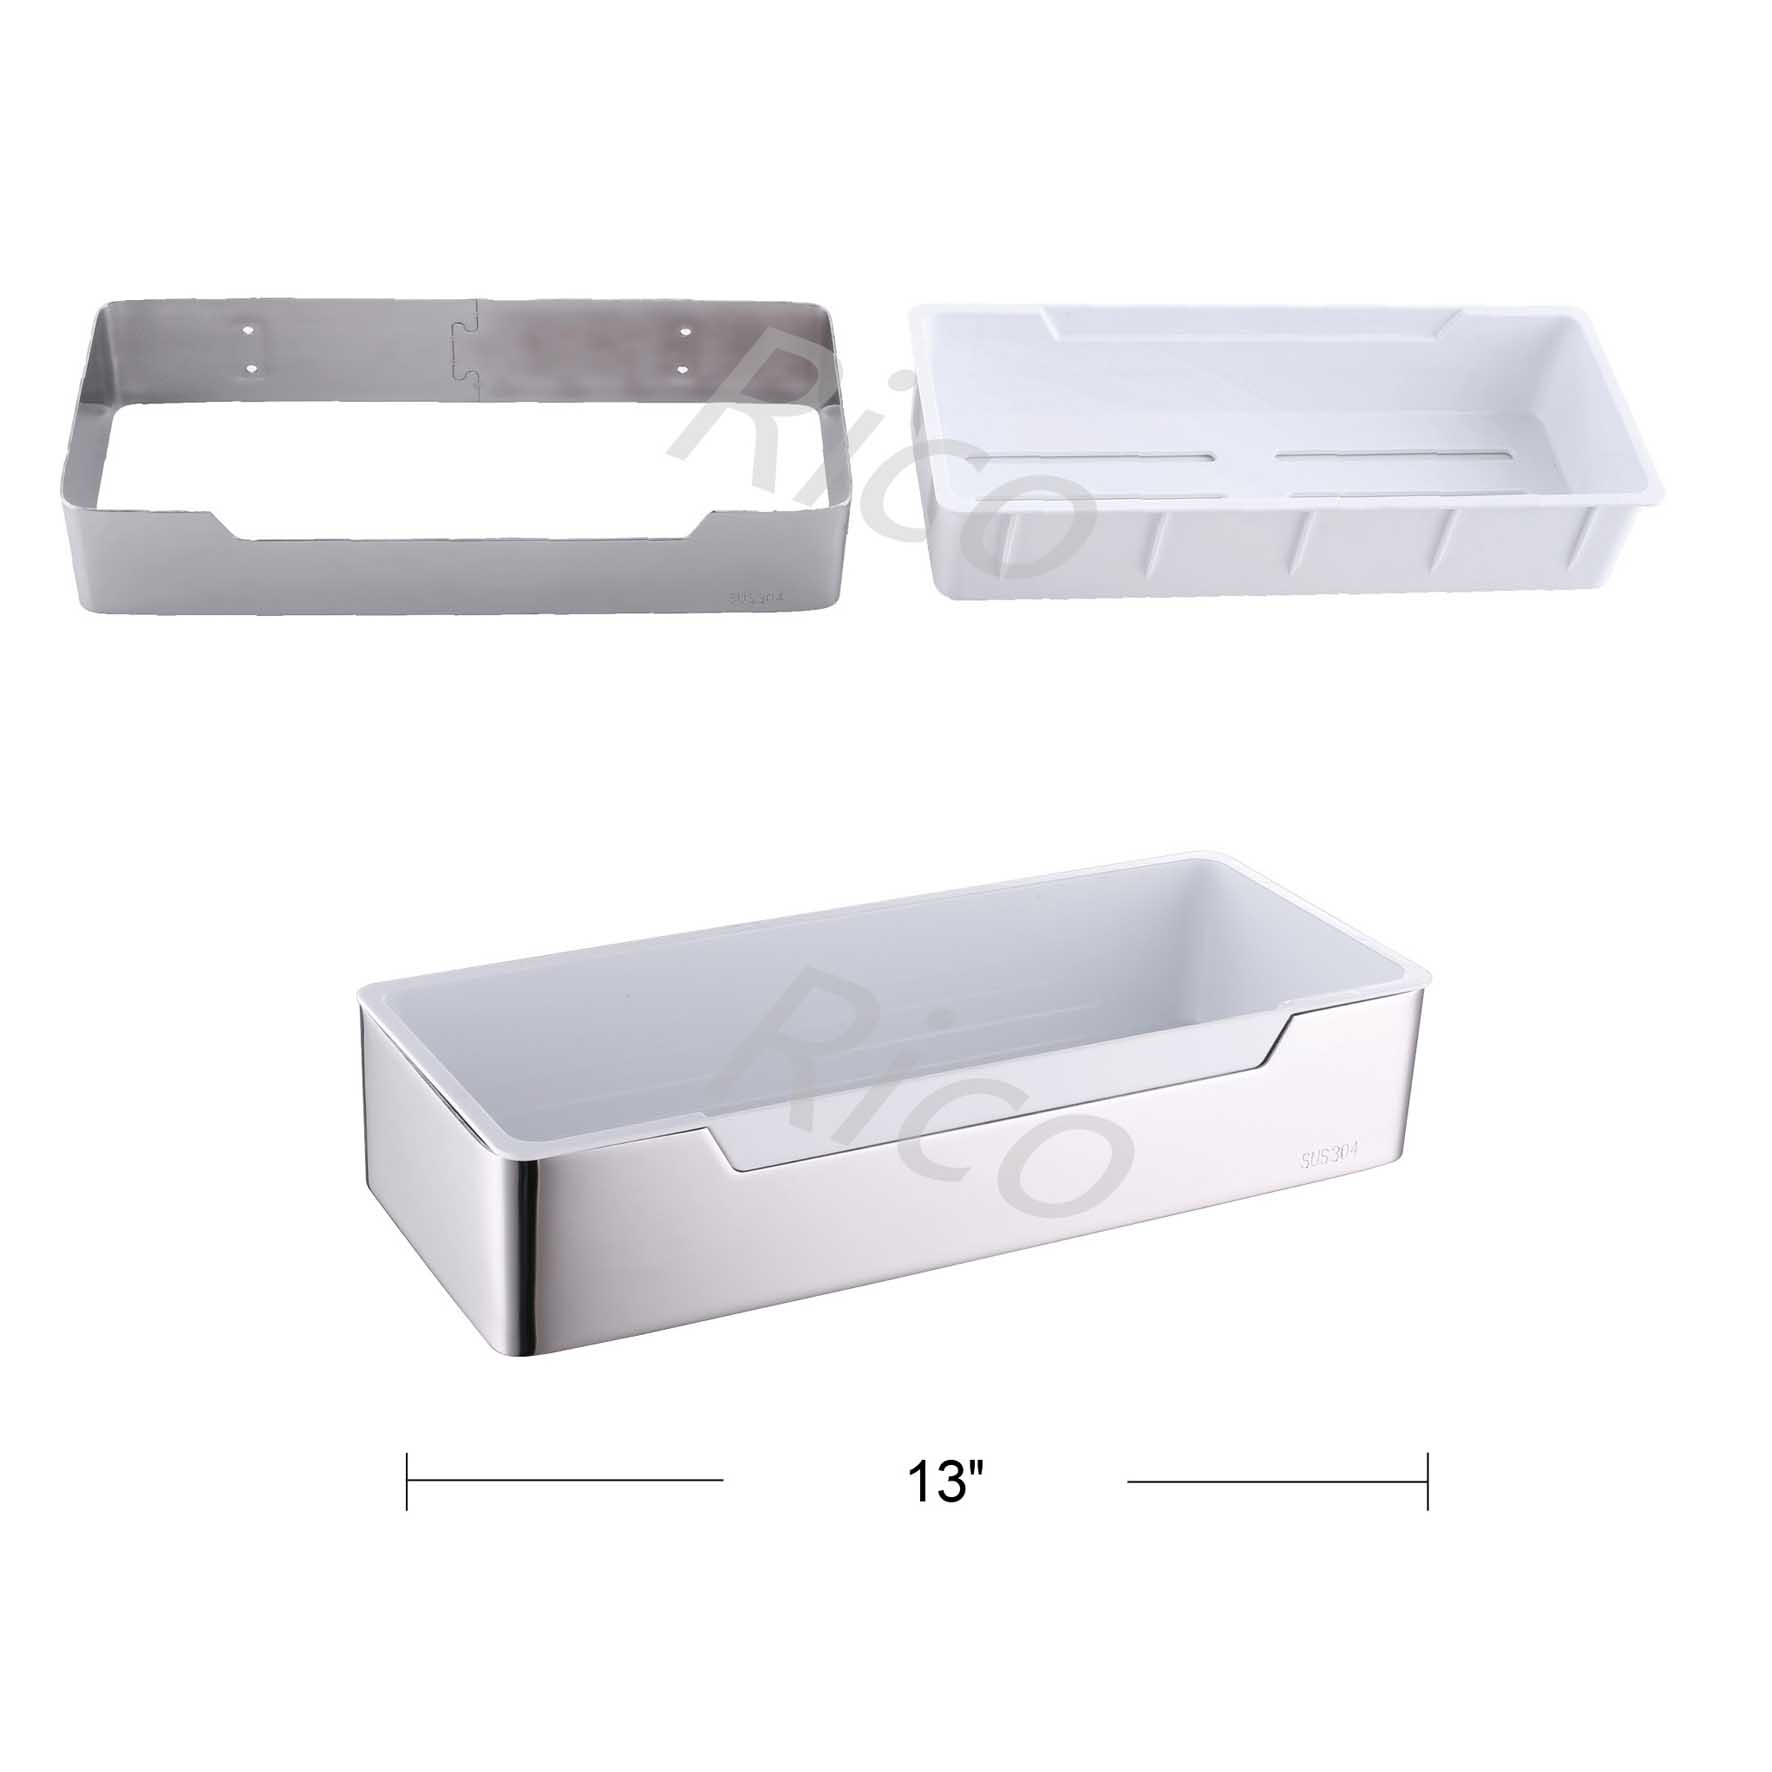 Rico : Stainless Steel Soap Basket – RICO-B11828